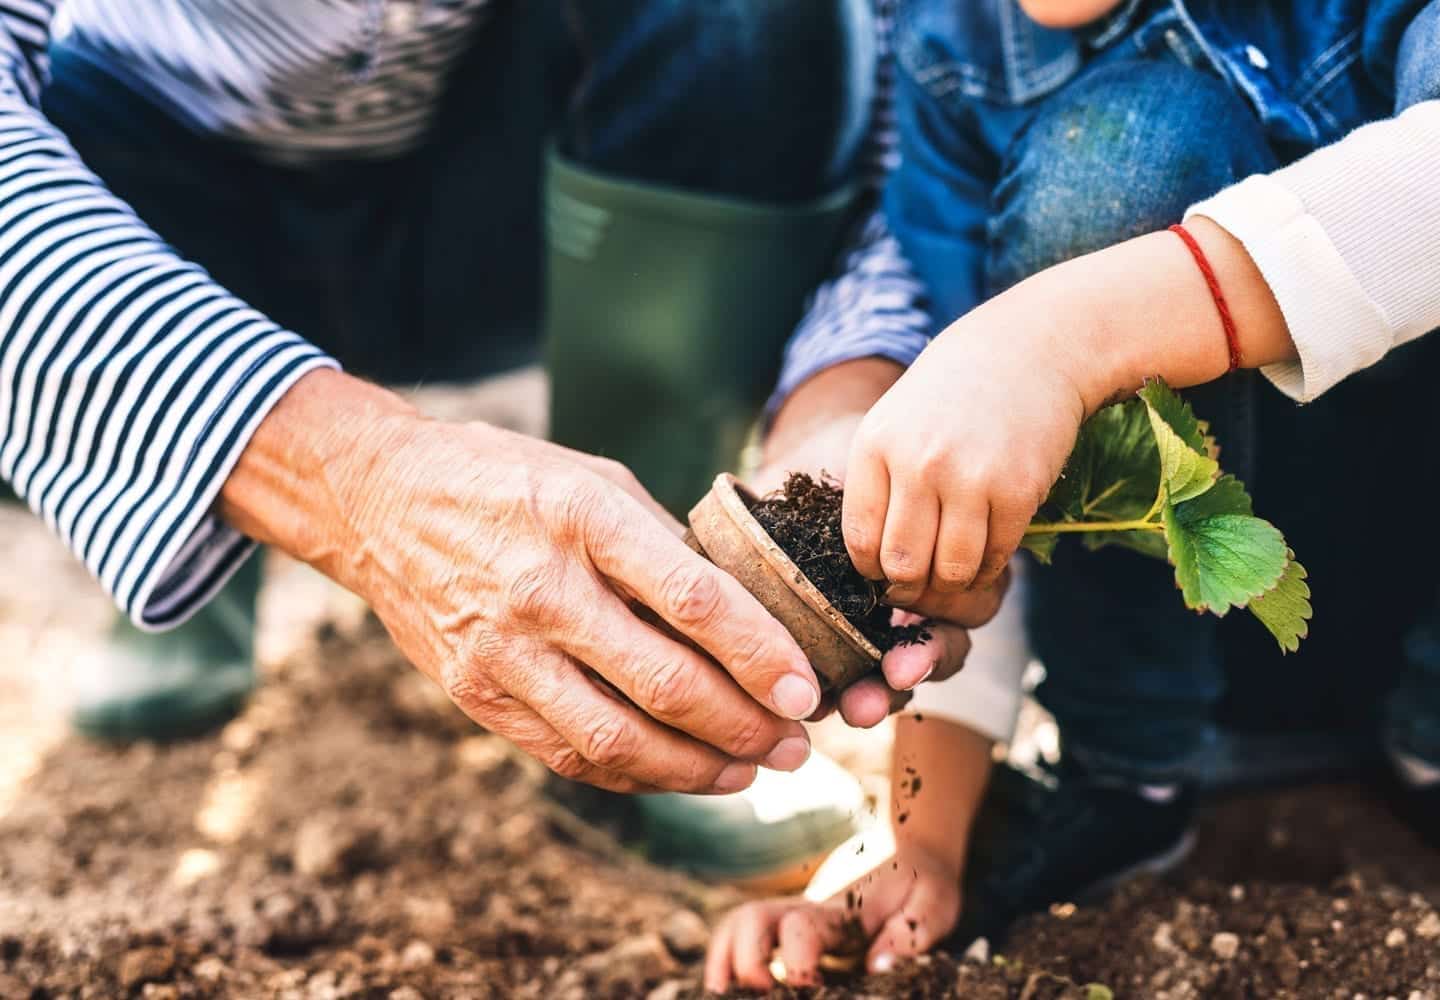 A grandfather teaches his grandson how to pot plants